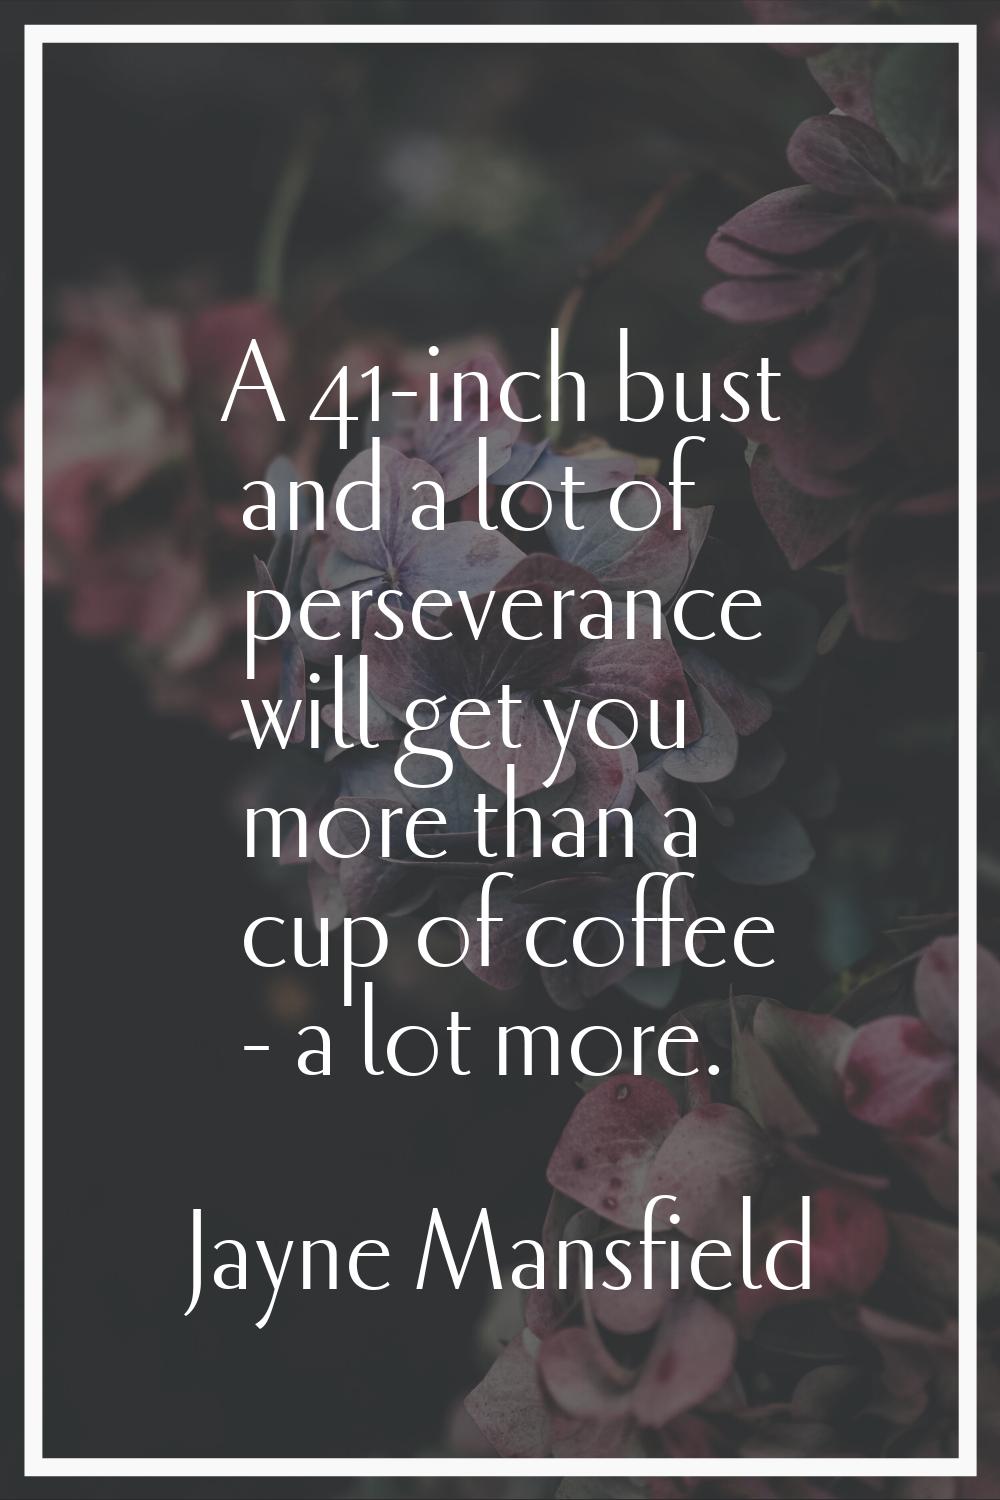 A 41-inch bust and a lot of perseverance will get you more than a cup of coffee - a lot more.